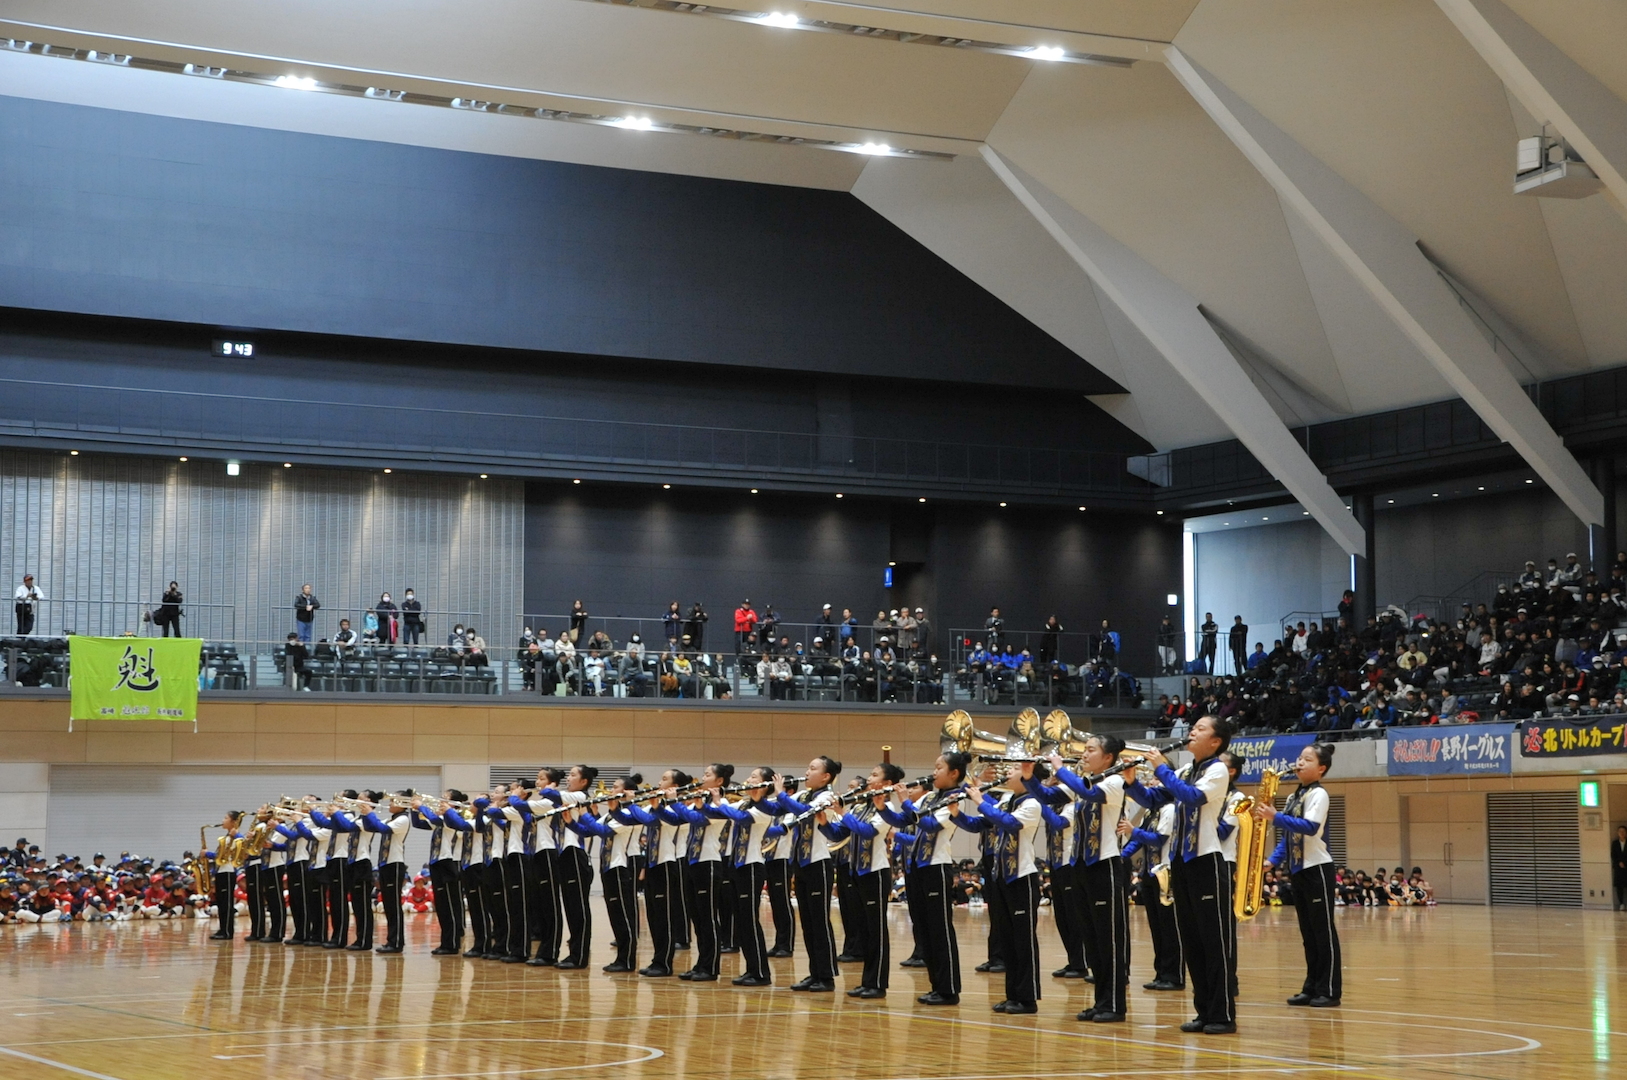 Takasaki Arena Opening Ceremony<br />Performed by<br />The Tsukasawa Junior High School Marching Band 2